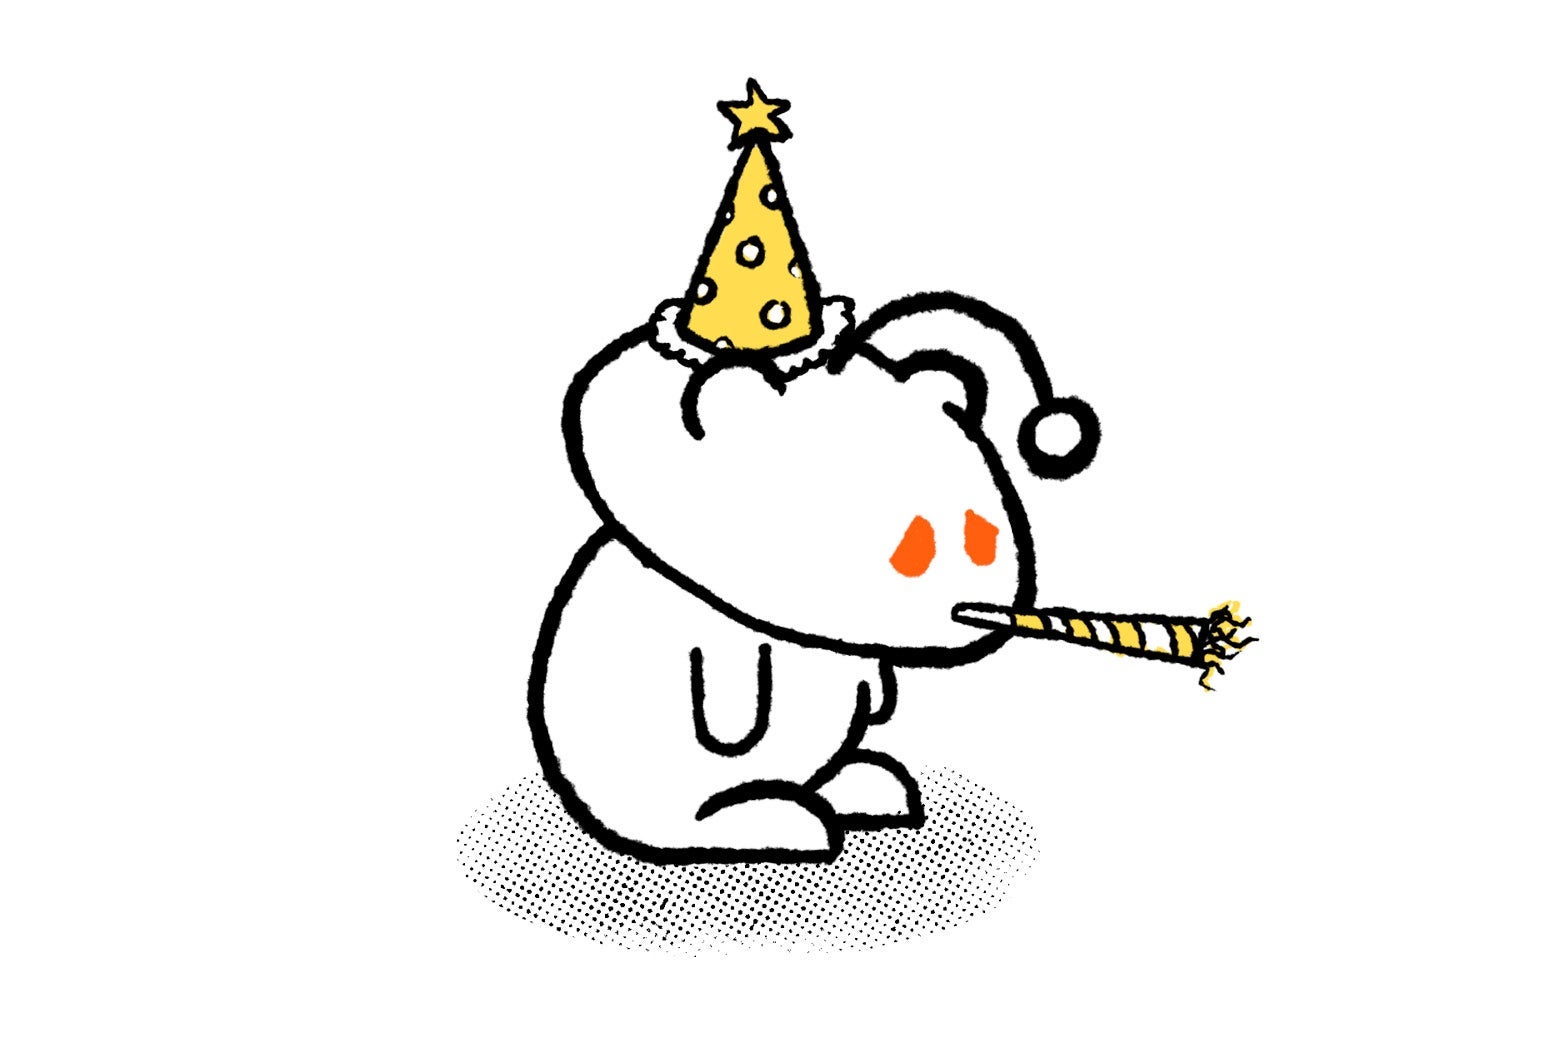 A drooping Reddit snoo wearing a party hat and blowing a party horn.